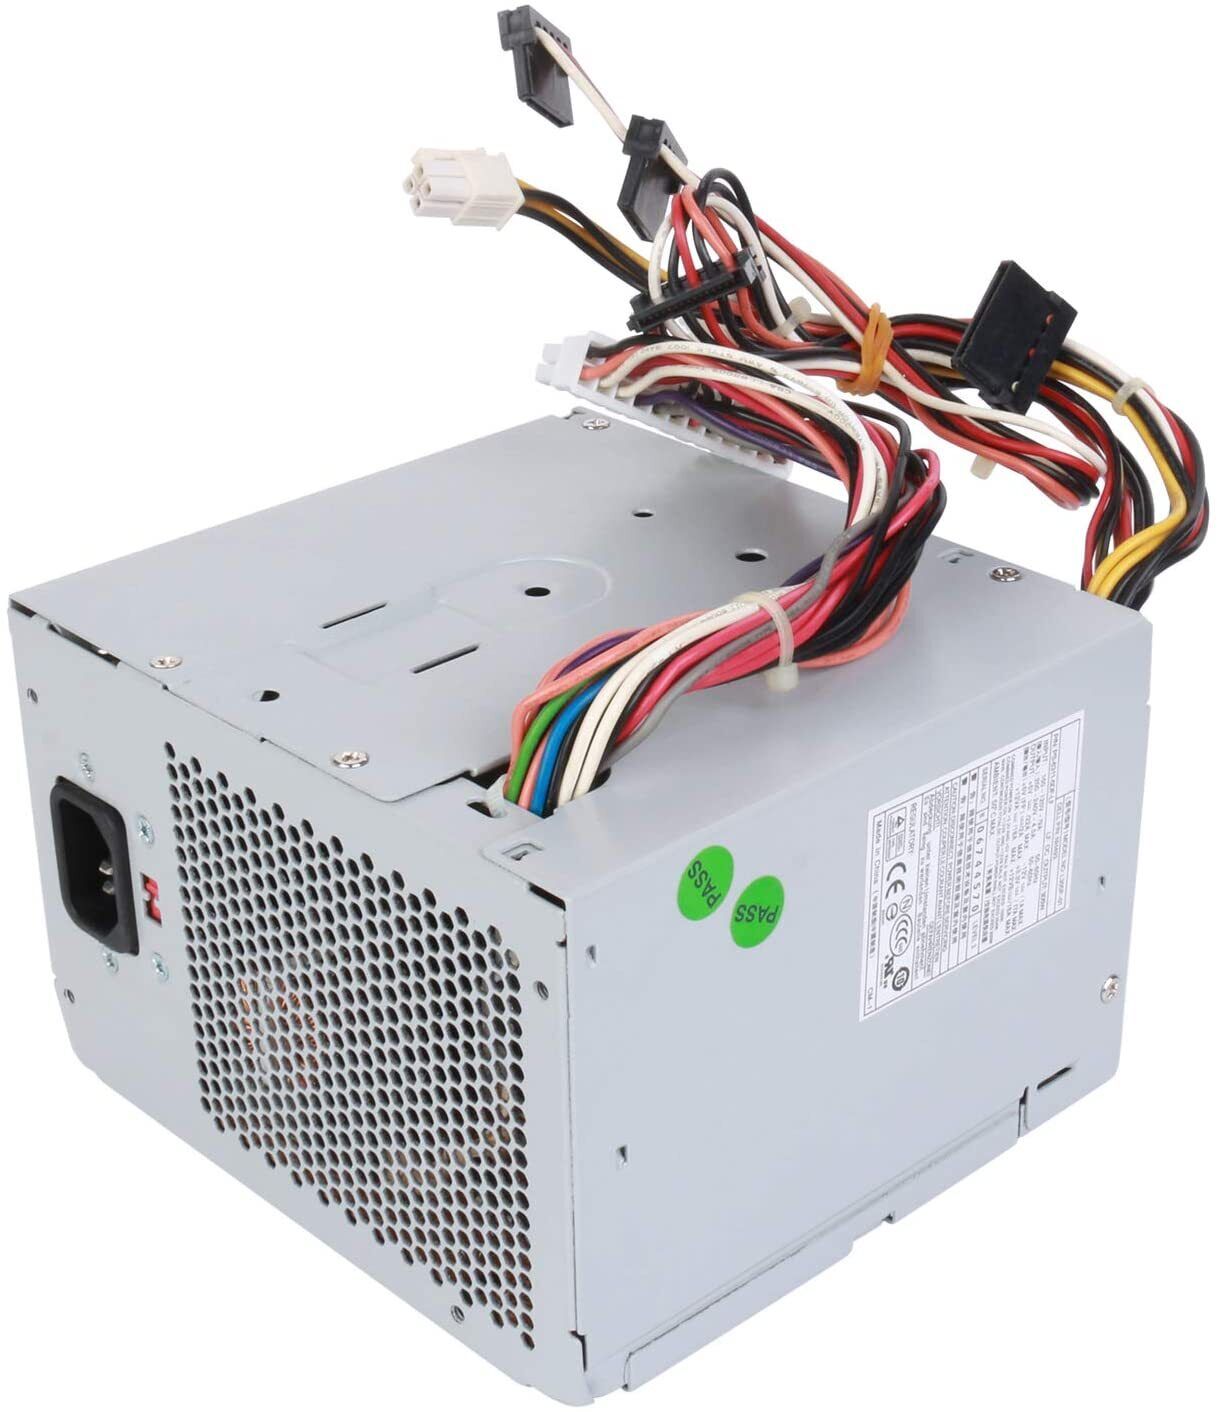 305W Power Supply NH493 Fors Dell Optiplex 360 380 580 745 755 760 780 960 New